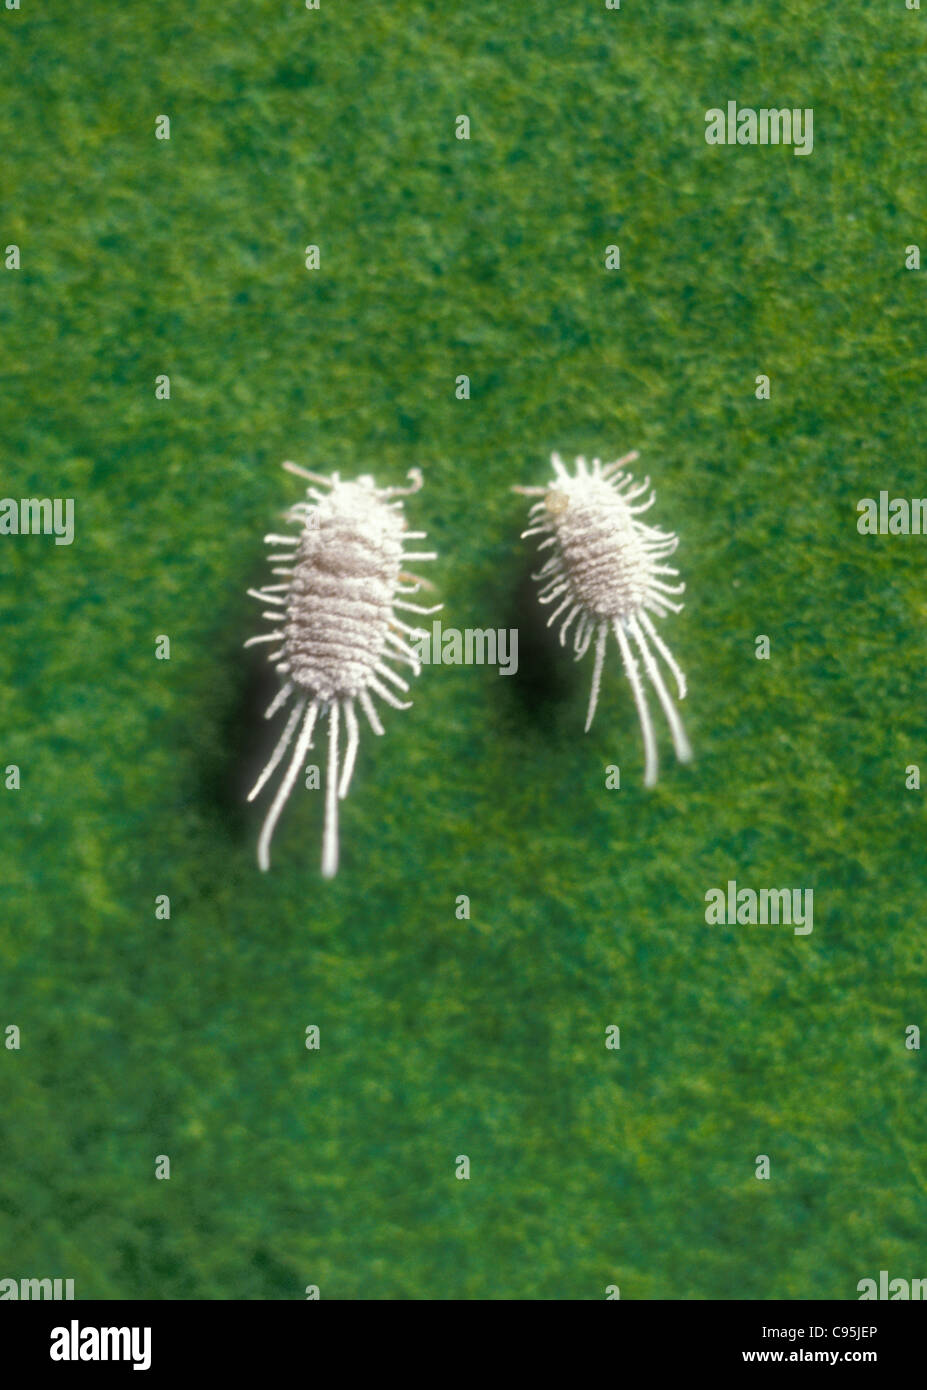 Mealybug insect plant pest macro closeup of two unarmored scale insects cottony white Pseudococcus Longtailed mealy bugs antenna Stock Photo